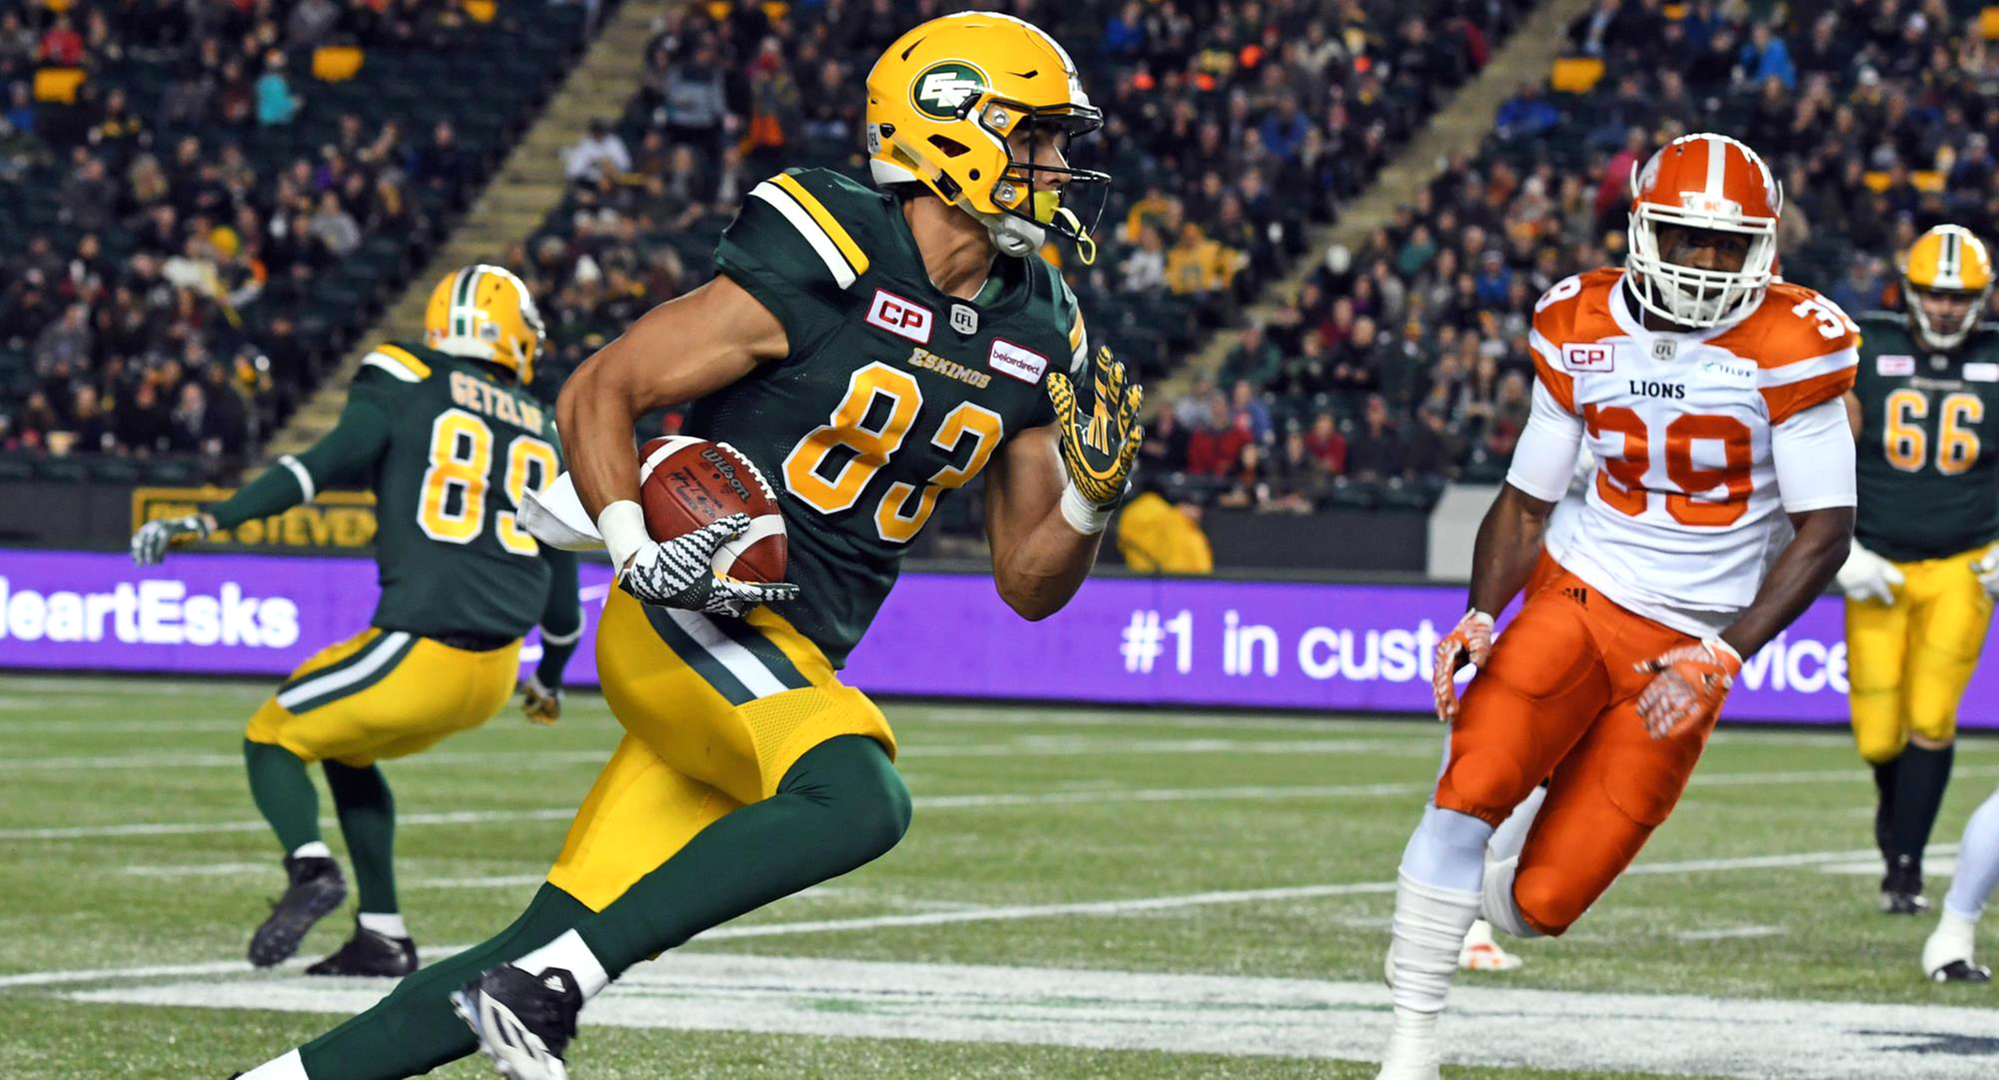 Zylstra Makes His Mark In CFL